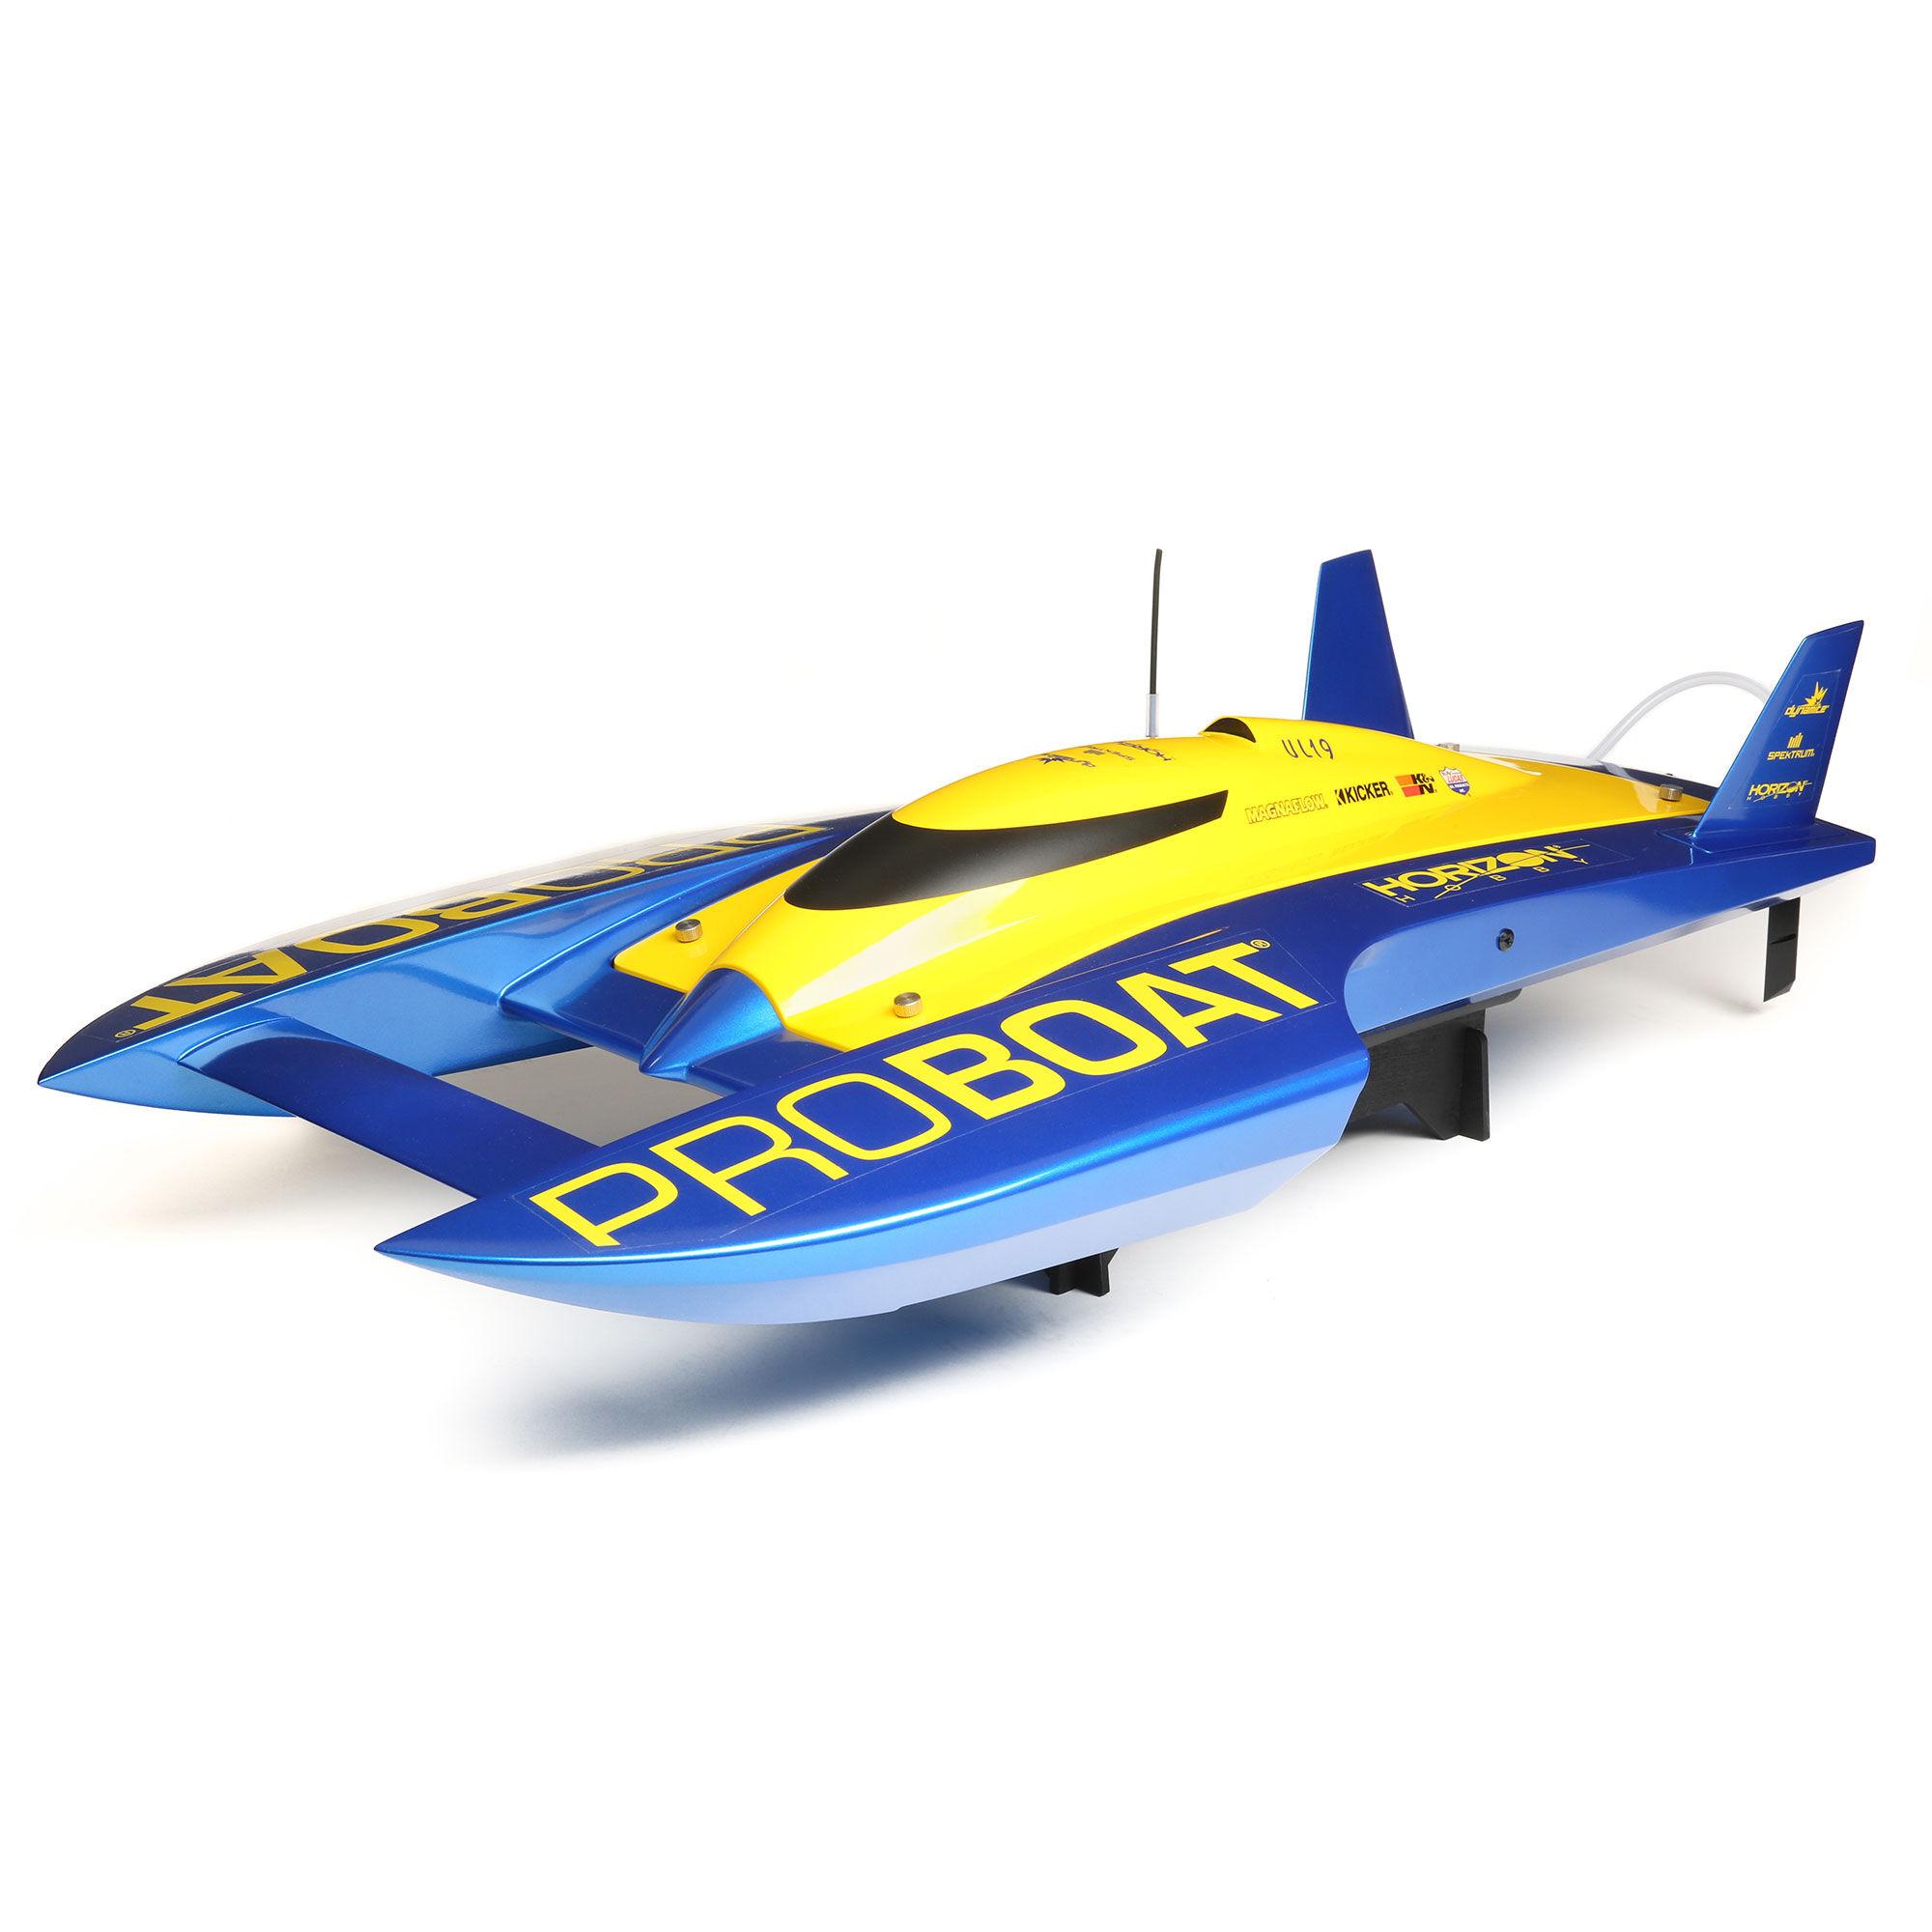 Proboat Rc: Racing events and resources for ProBoat RC boats.